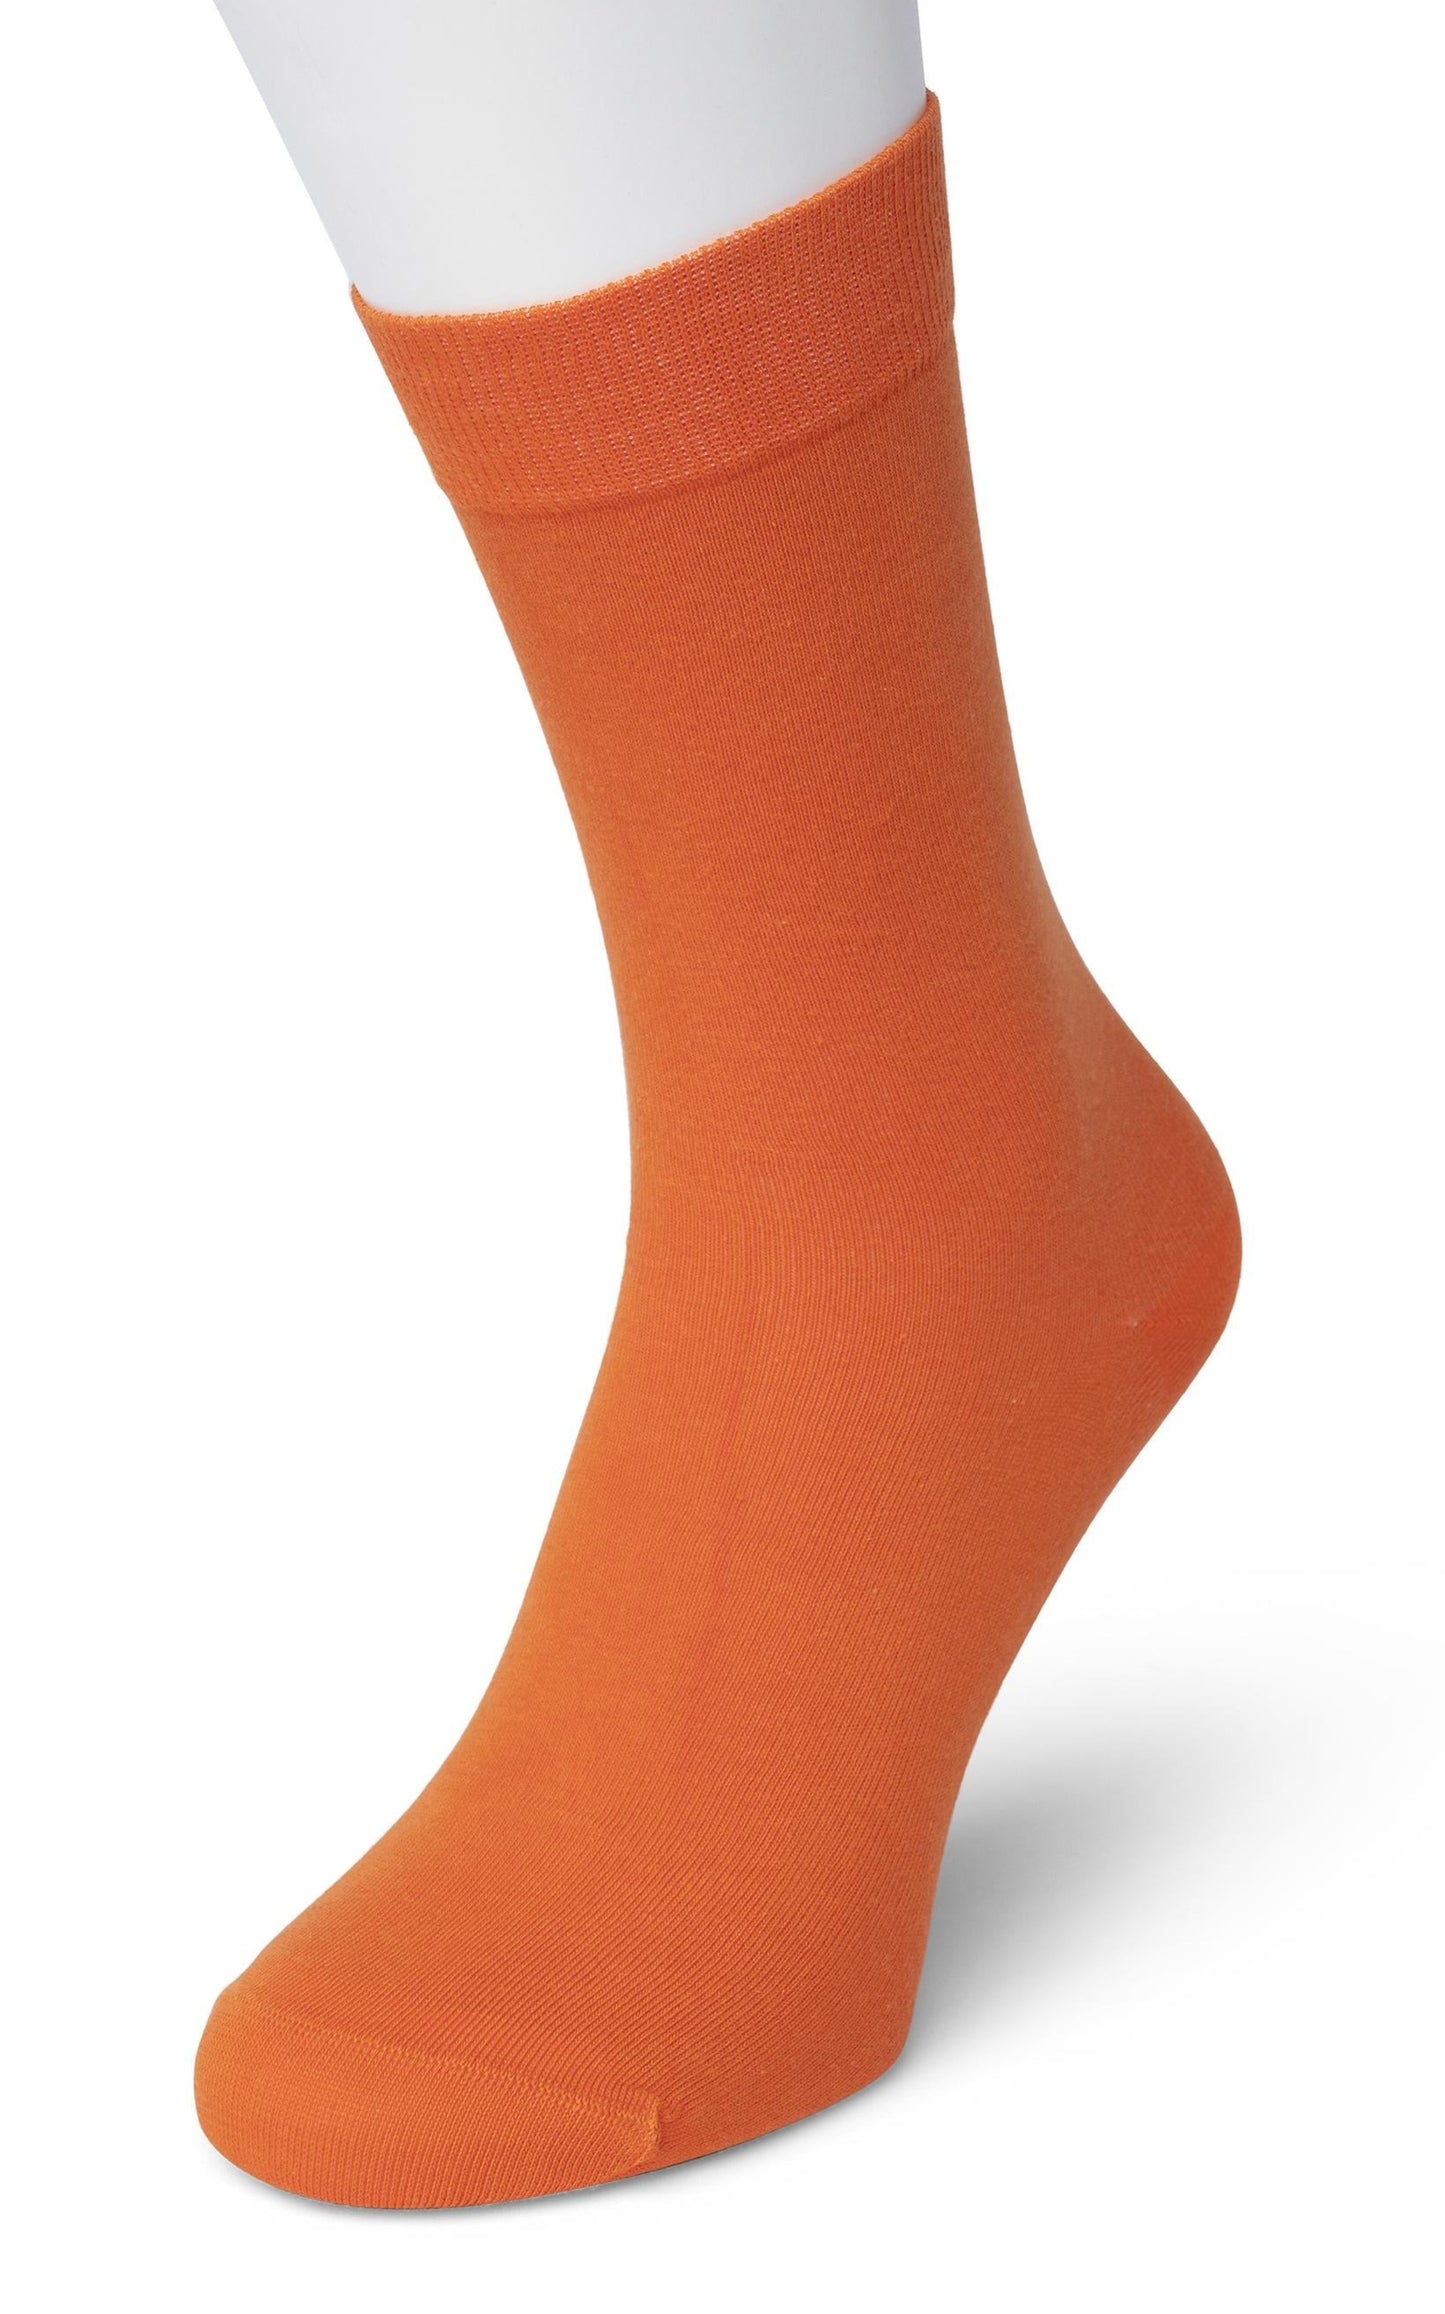 Bonnie Doon 83422 / BD632401 Cotton Sock -  Orange ankle socks available in men and women sizes